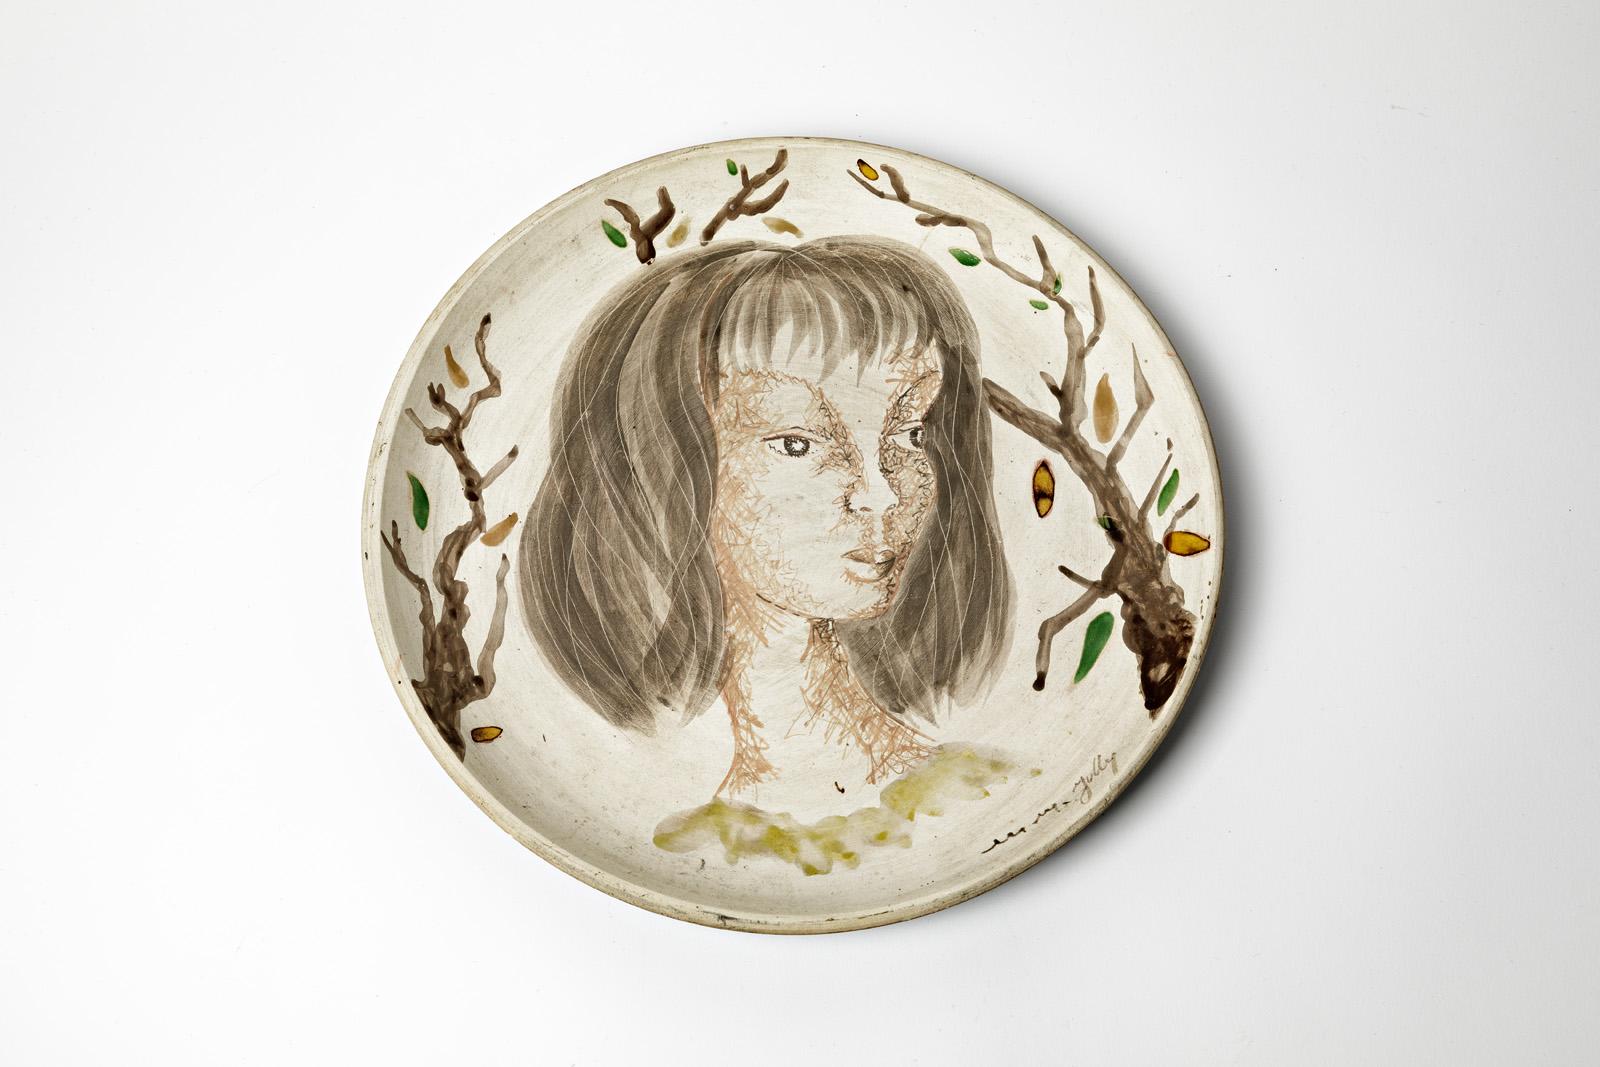 Marie Madelaine Jolly

French unique handmade ceramic piece by Marie Madelaine Jolly

Friend of Jean Cocteau

Large wall decorative ceramic plate

Original good condition

Signed 

Measures: Height 4 cm
Large 32 cm.